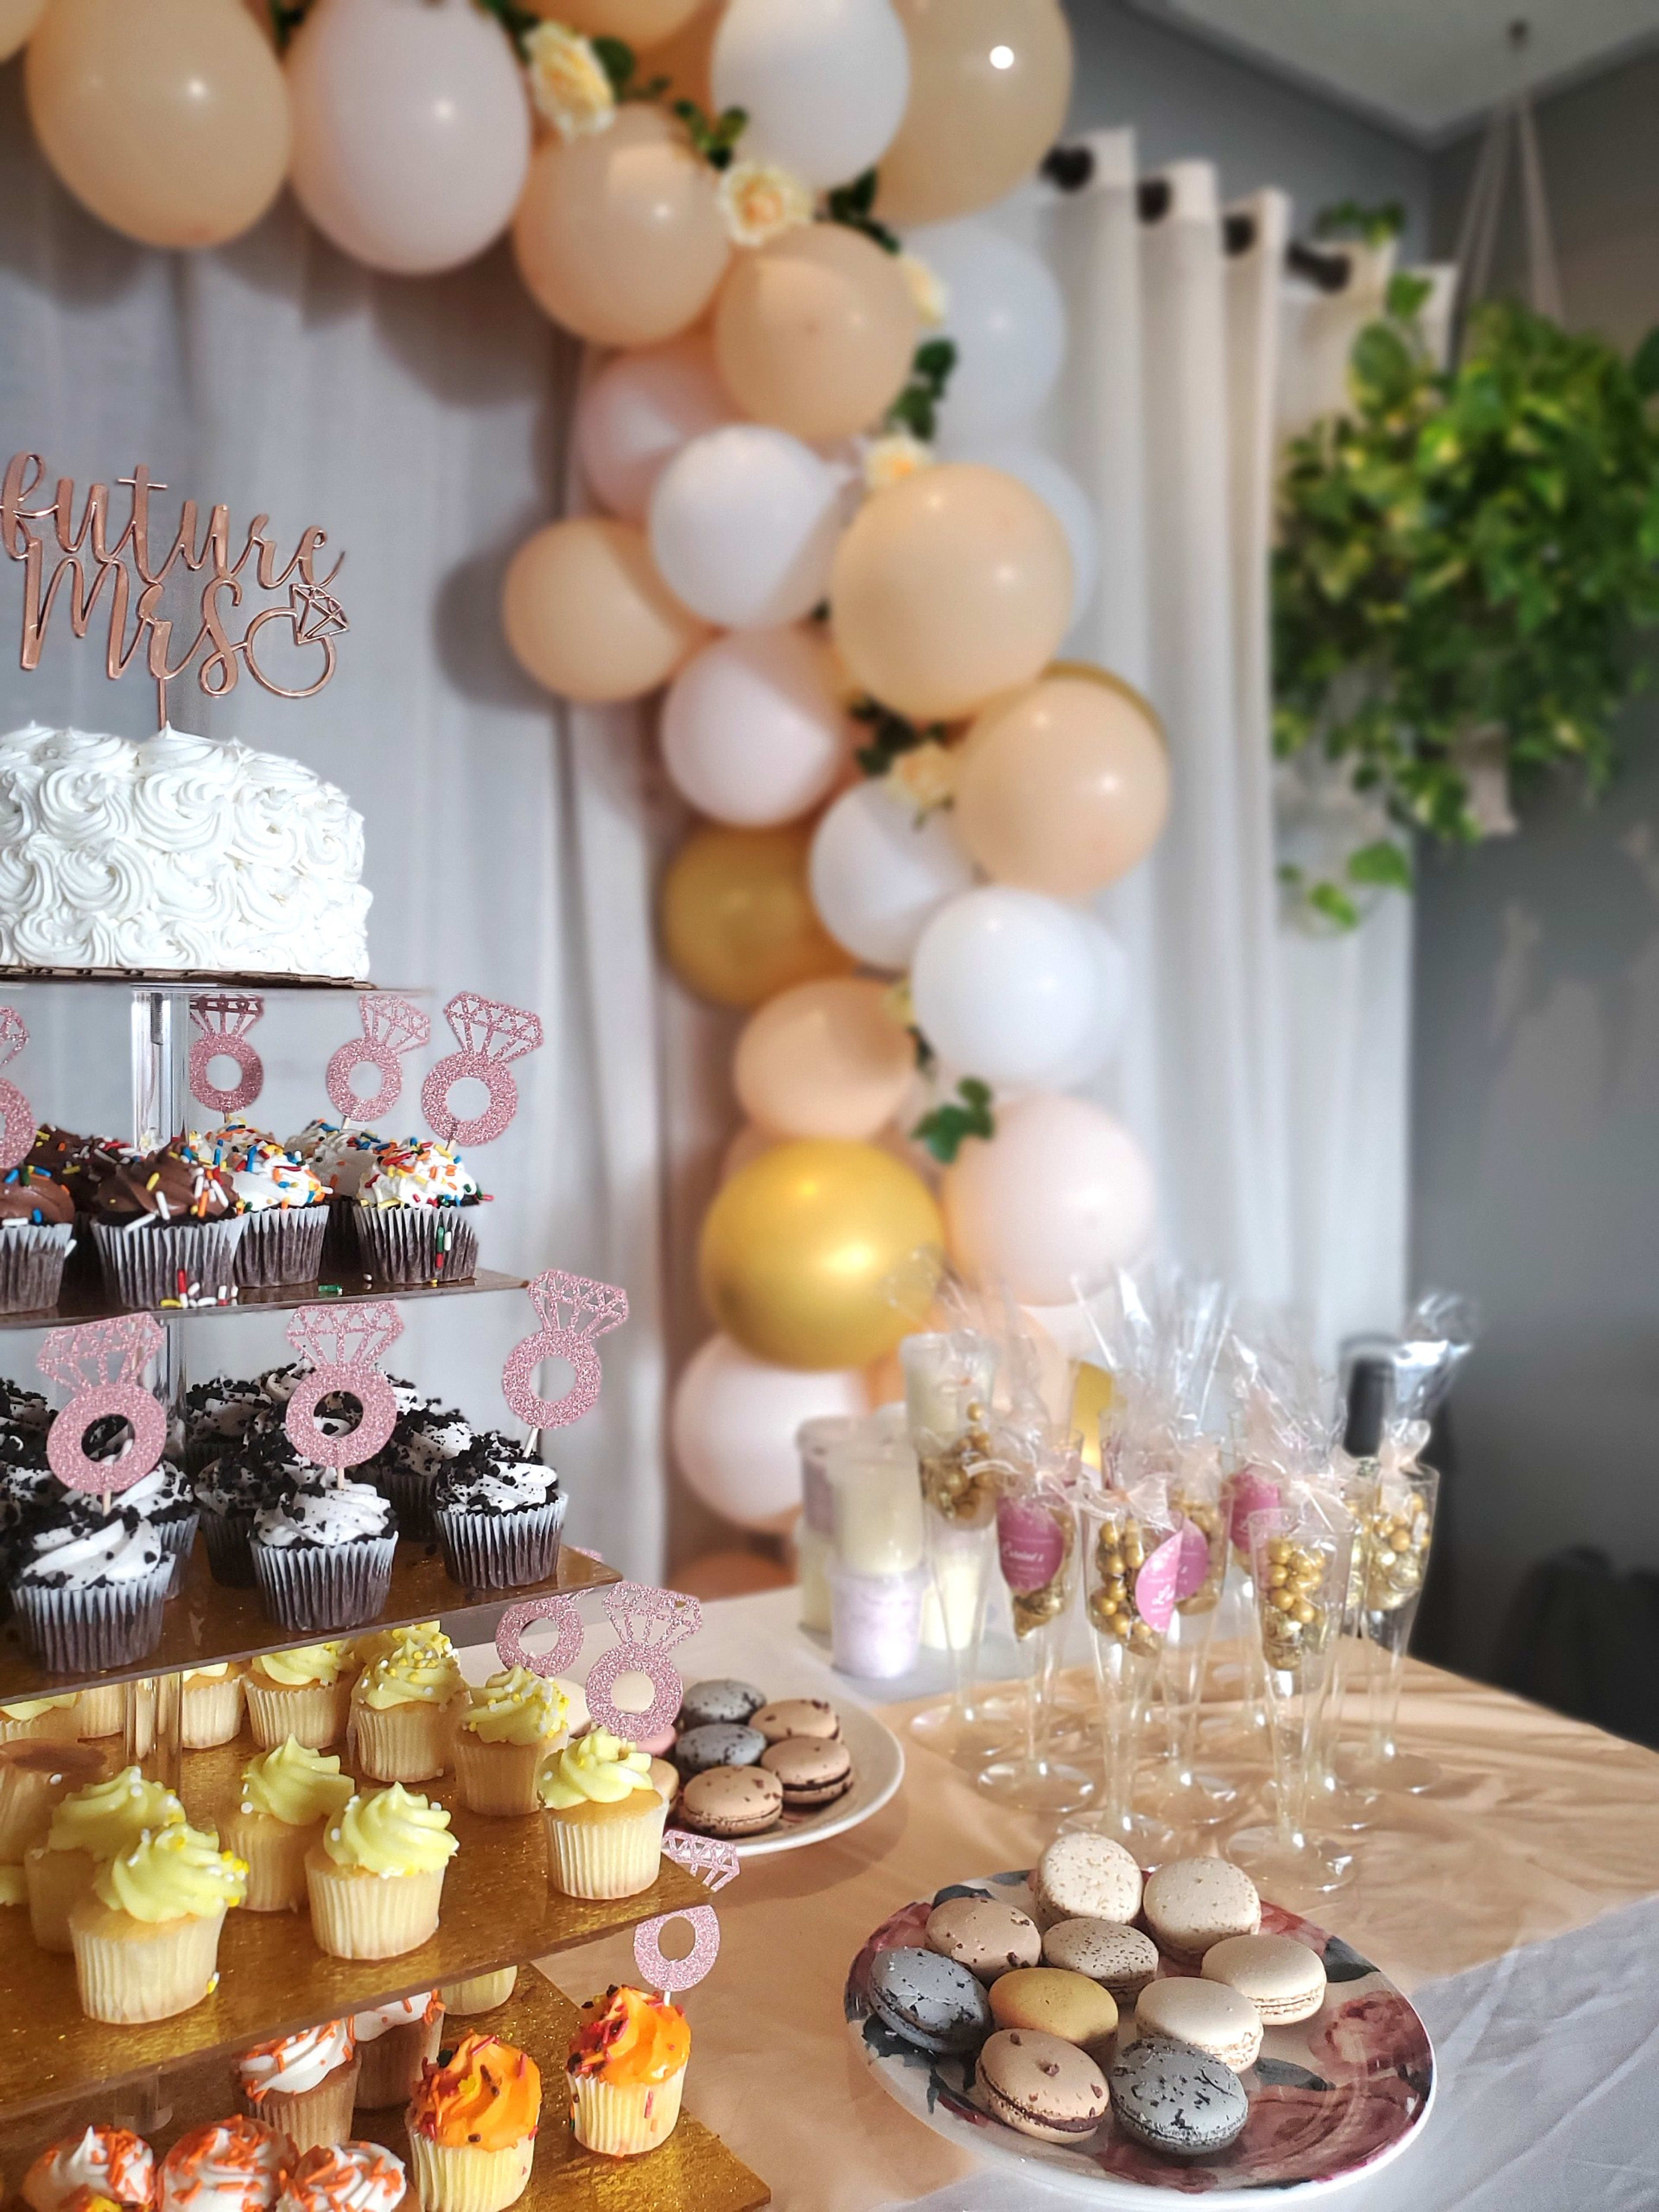 A bridal shower table adorned with an abundance of colorful cupcakes and snacks.